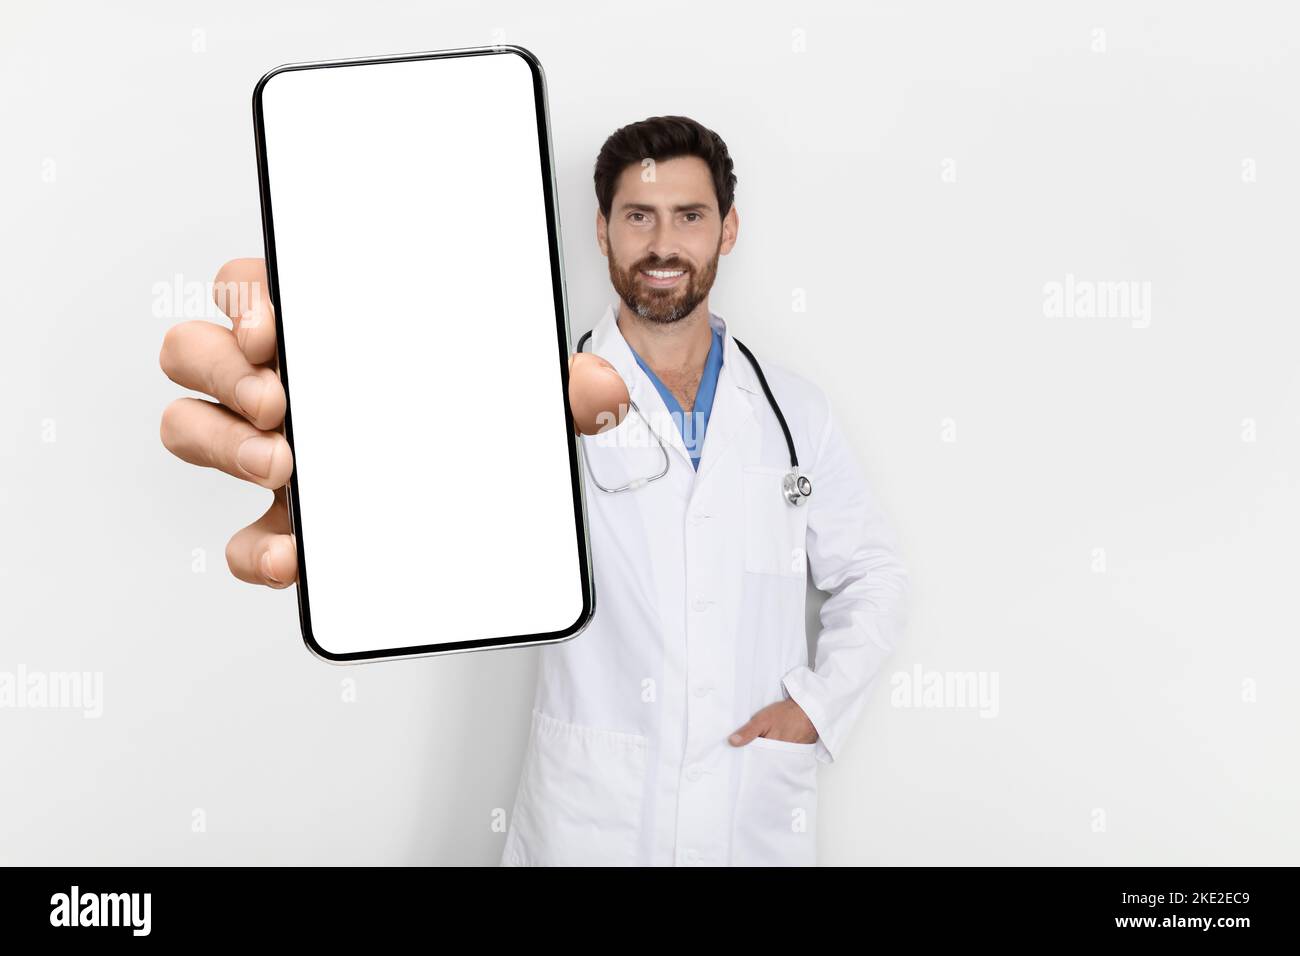 Medical App. Handsome Male Physician In Uniform Demonstrating Big Blank Smartphone Stock Photo